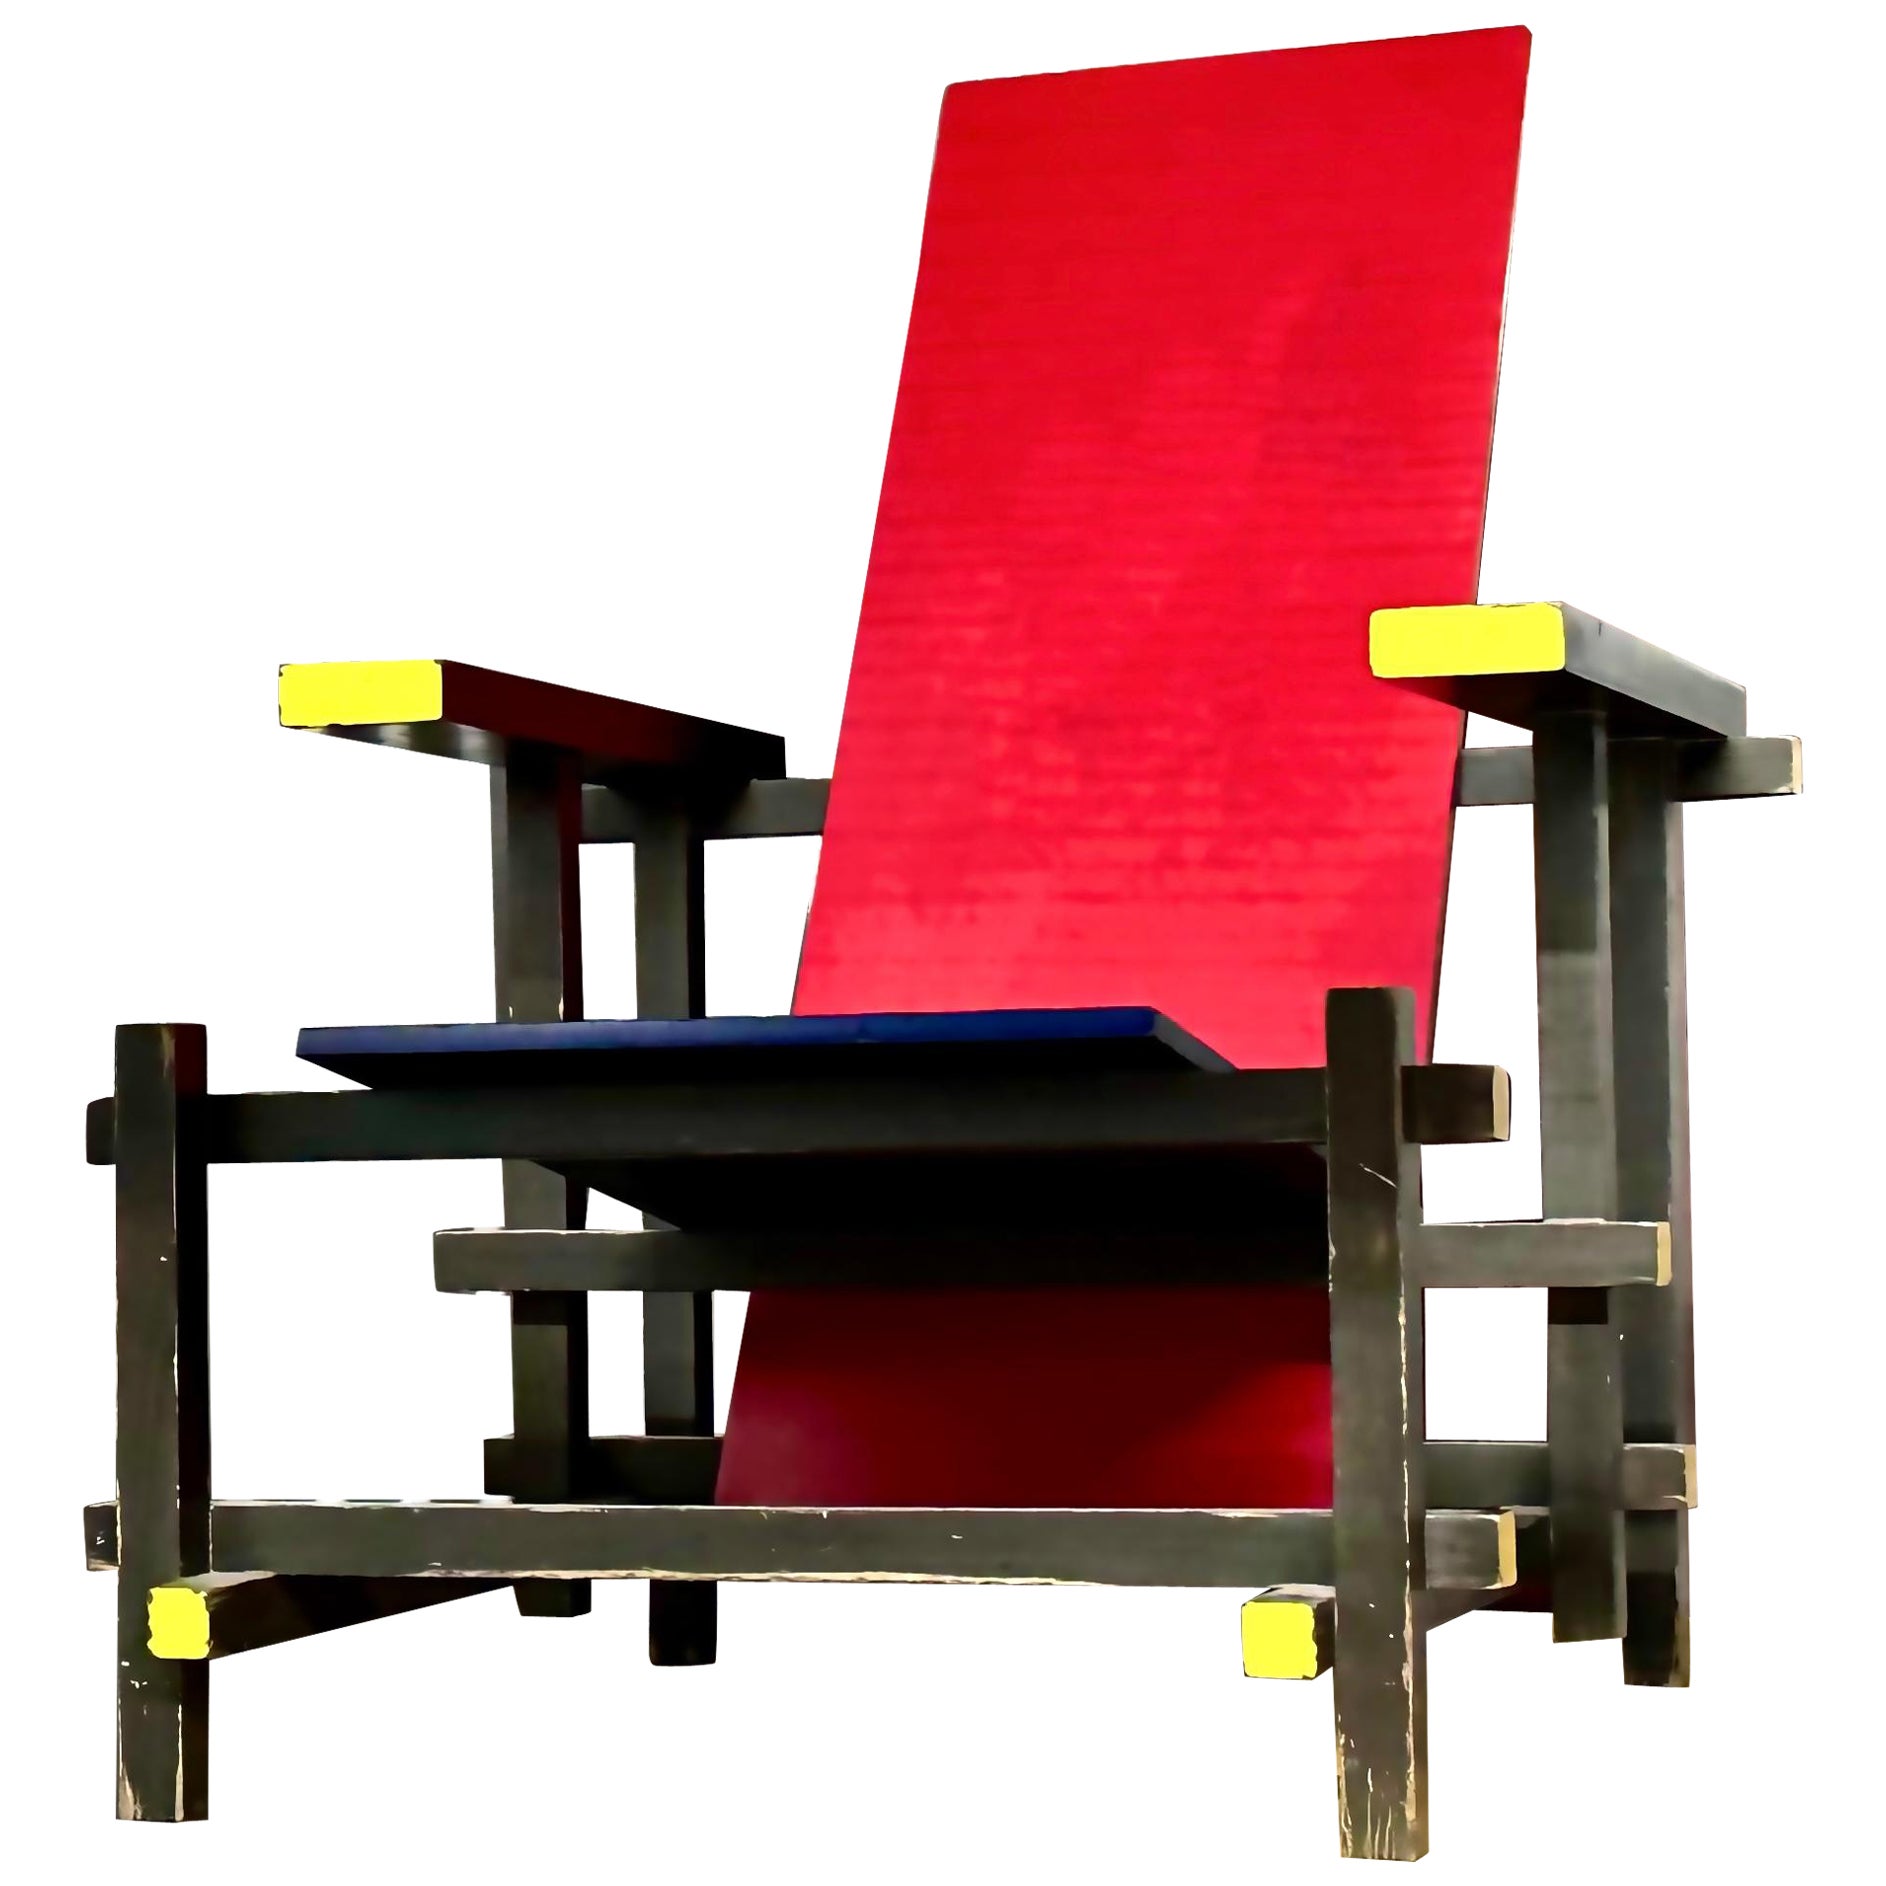 Red Blue Chair by Gerrit Rietveld for Cassina, Italy, De Stijl Modern, 1918